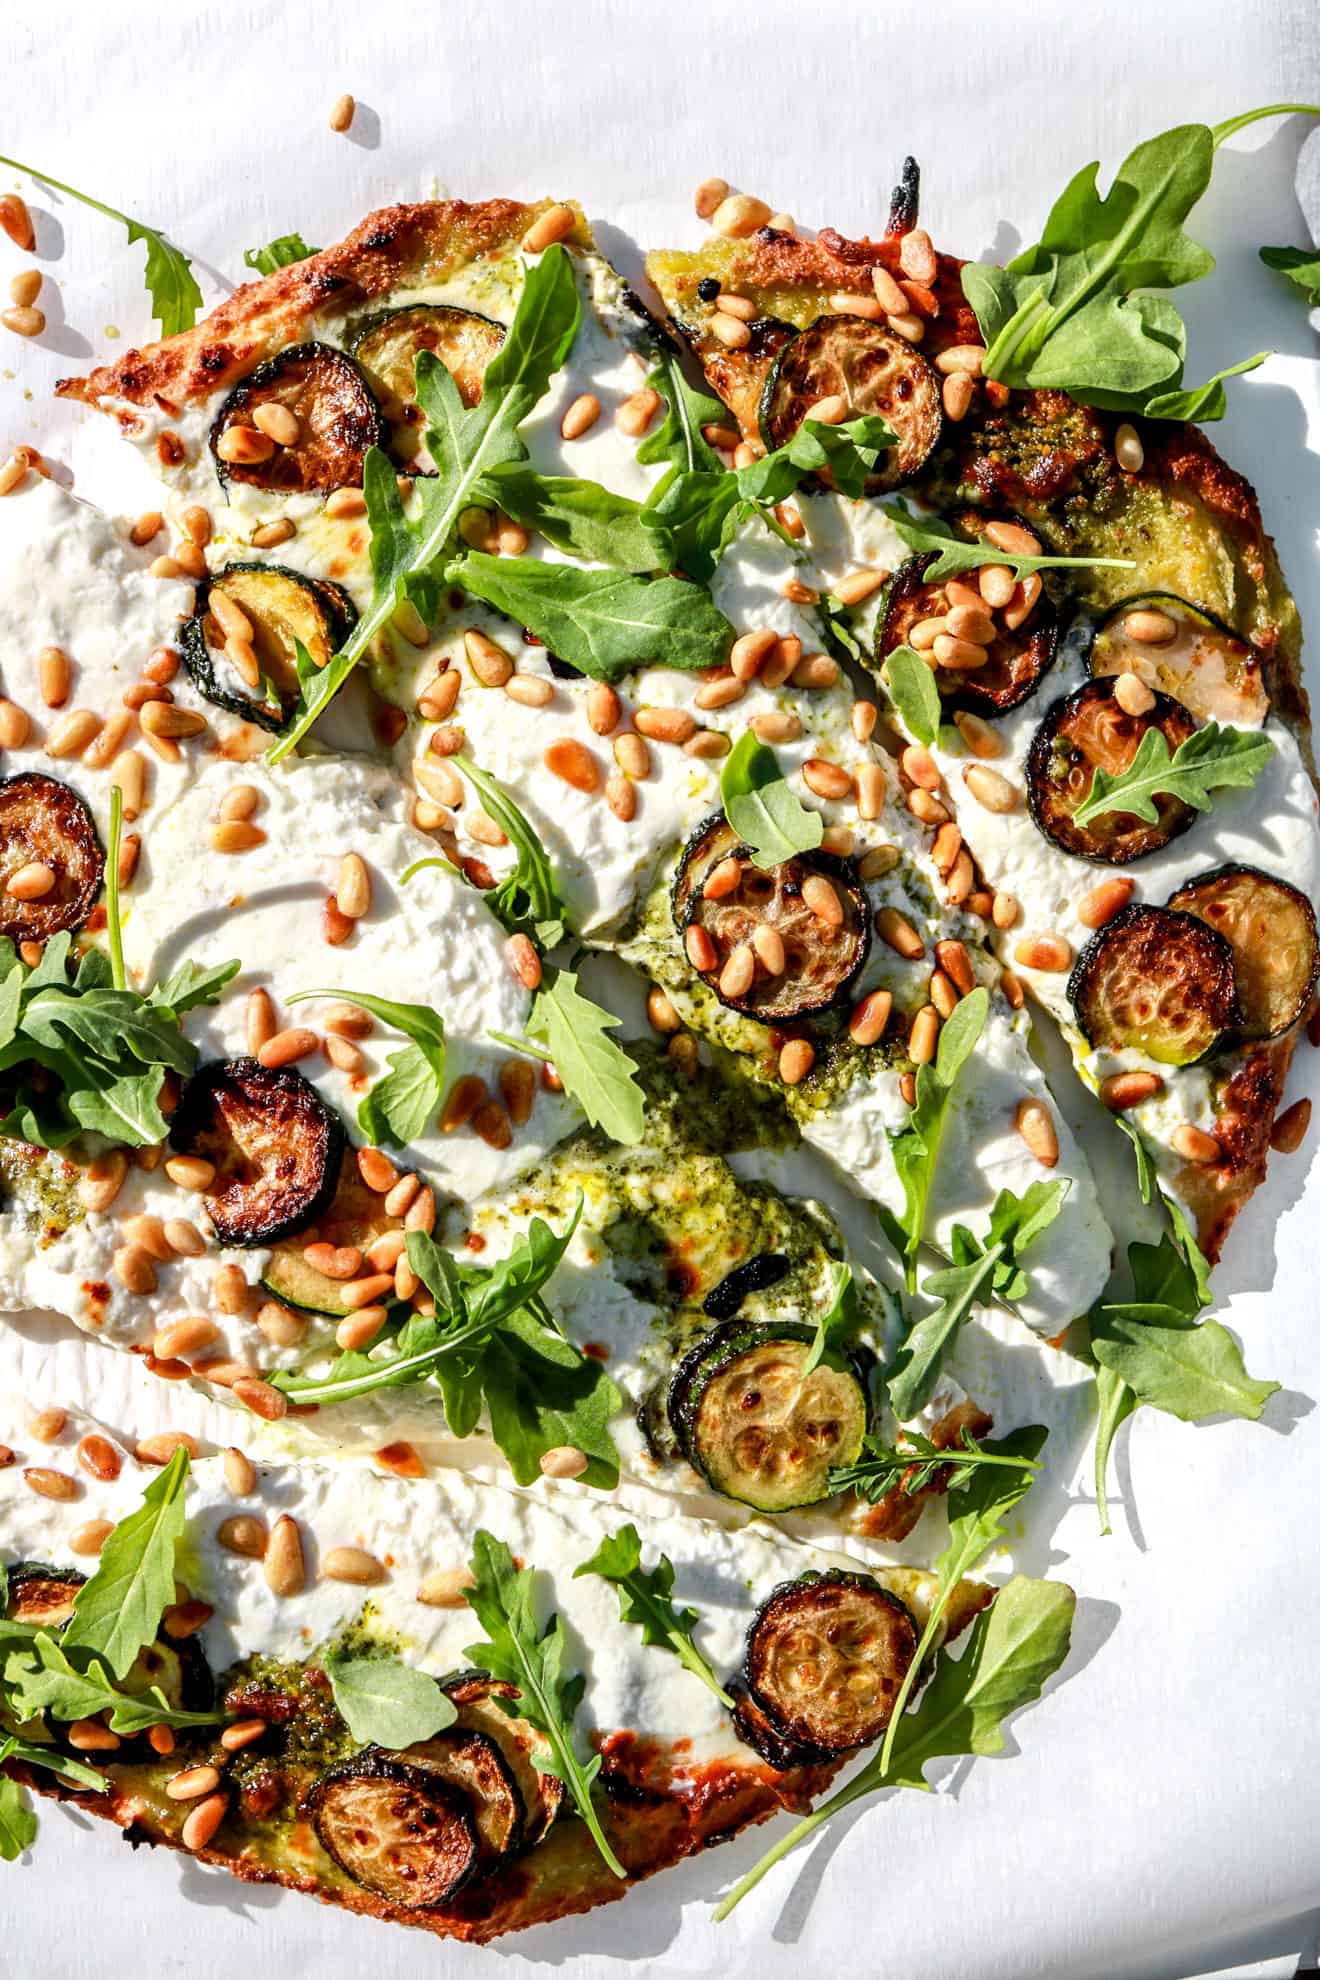 cauliflower low carb flatbread topped with zucchini, burrata, and pine nuts in sunlight on white background